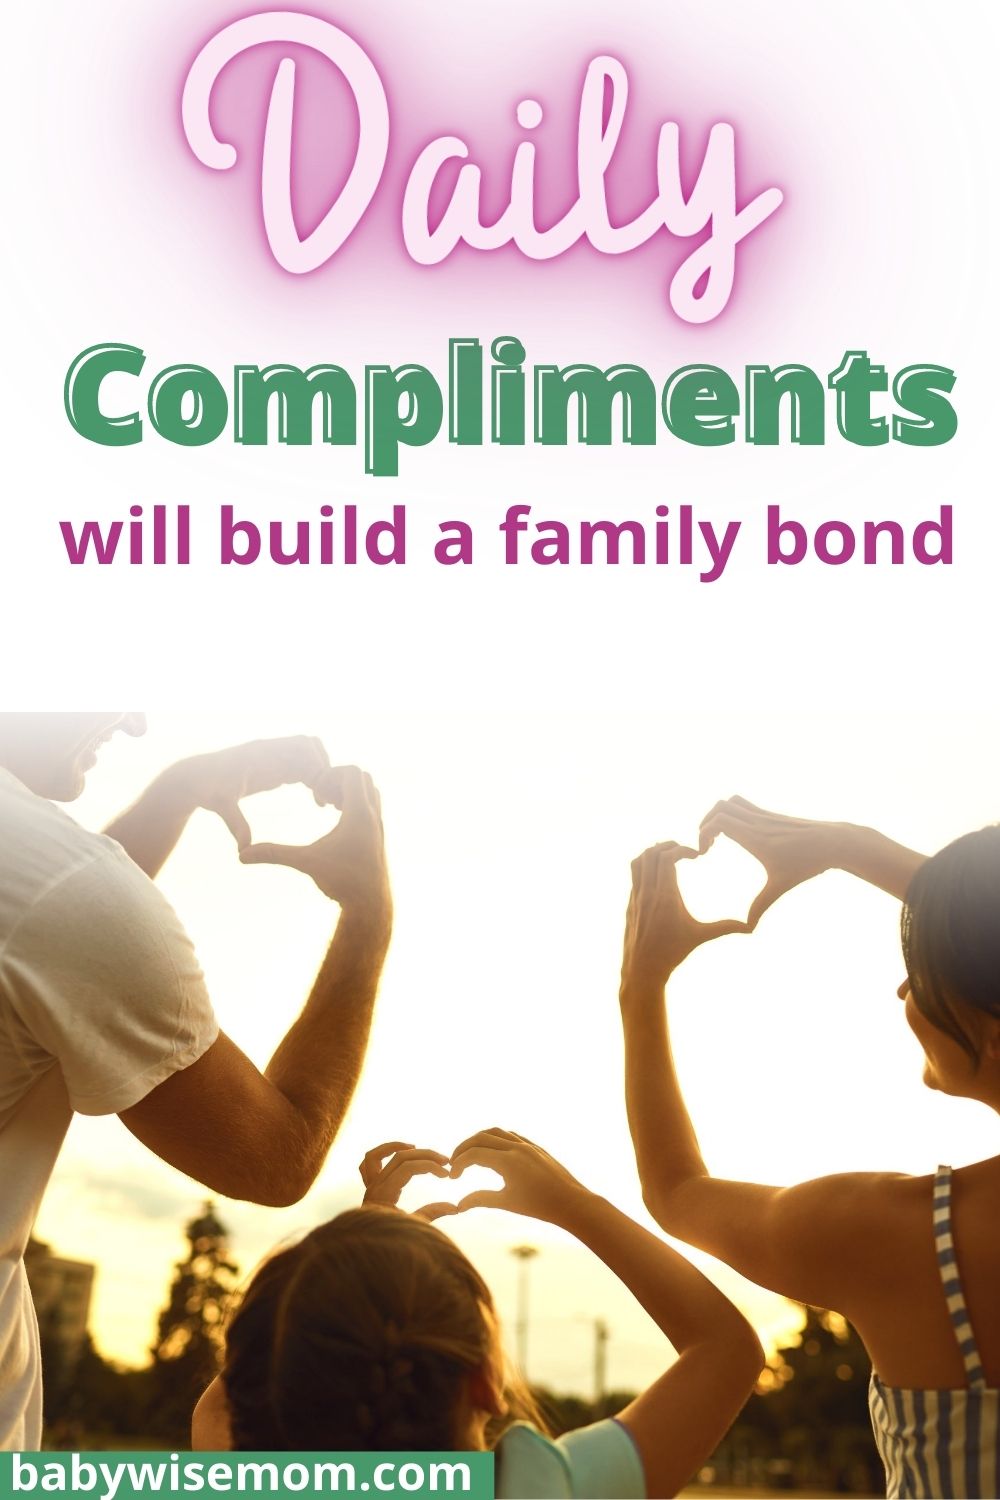 Daily compliments will build a family bond